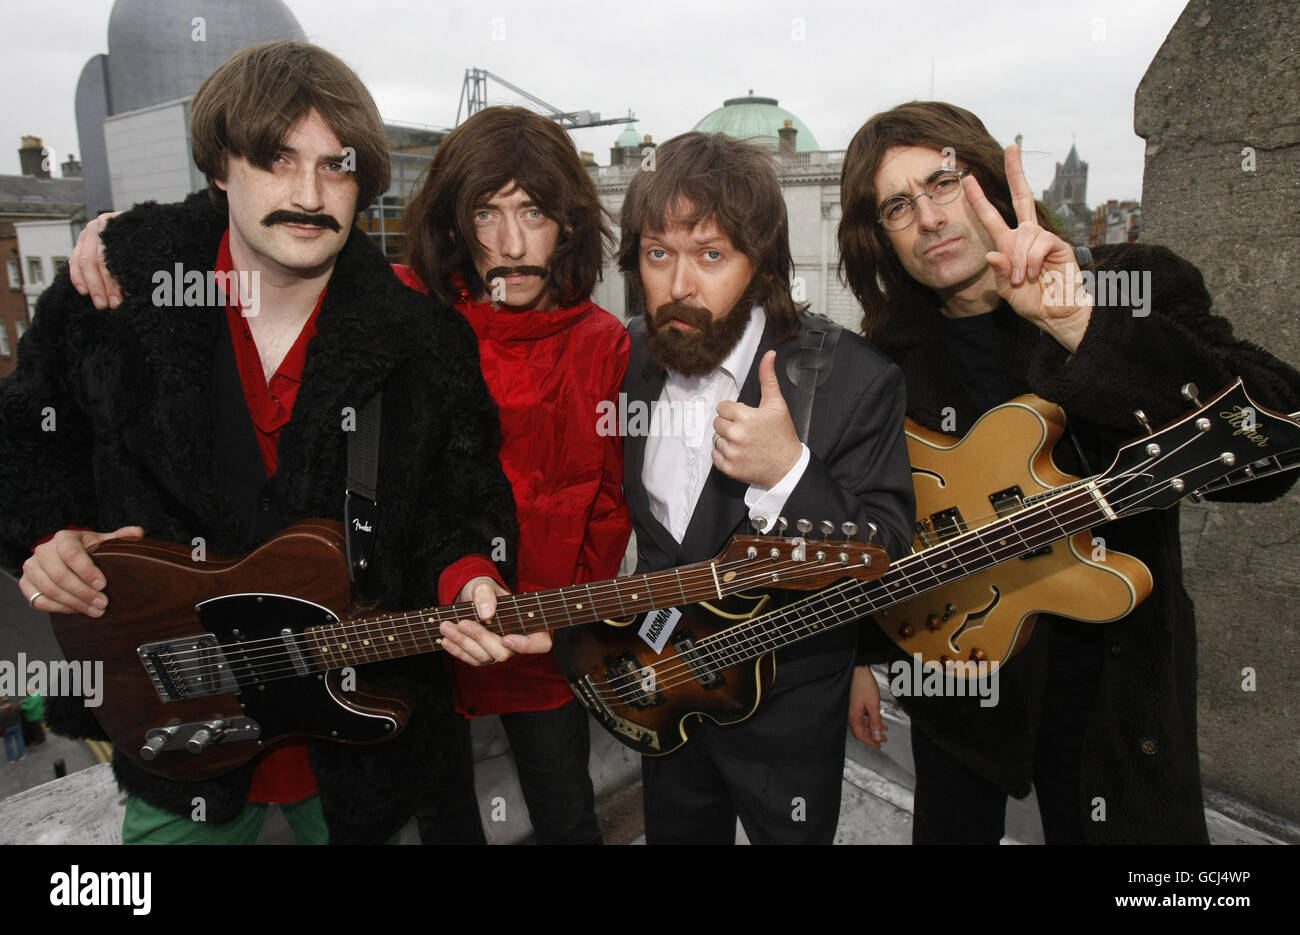 (Left to right) Rob McKinny as George Harrison, Binder as Ringo Starr, Fran King as Paul McCartney and Scott Maher as John Lennon, the cast of 'Get Back - The Story of The Beatles' perform on the roof of Dublin's Olympia Theatre to promote their show which runs from Wednesday 4th August until Sunday 8th August. Stock Photo